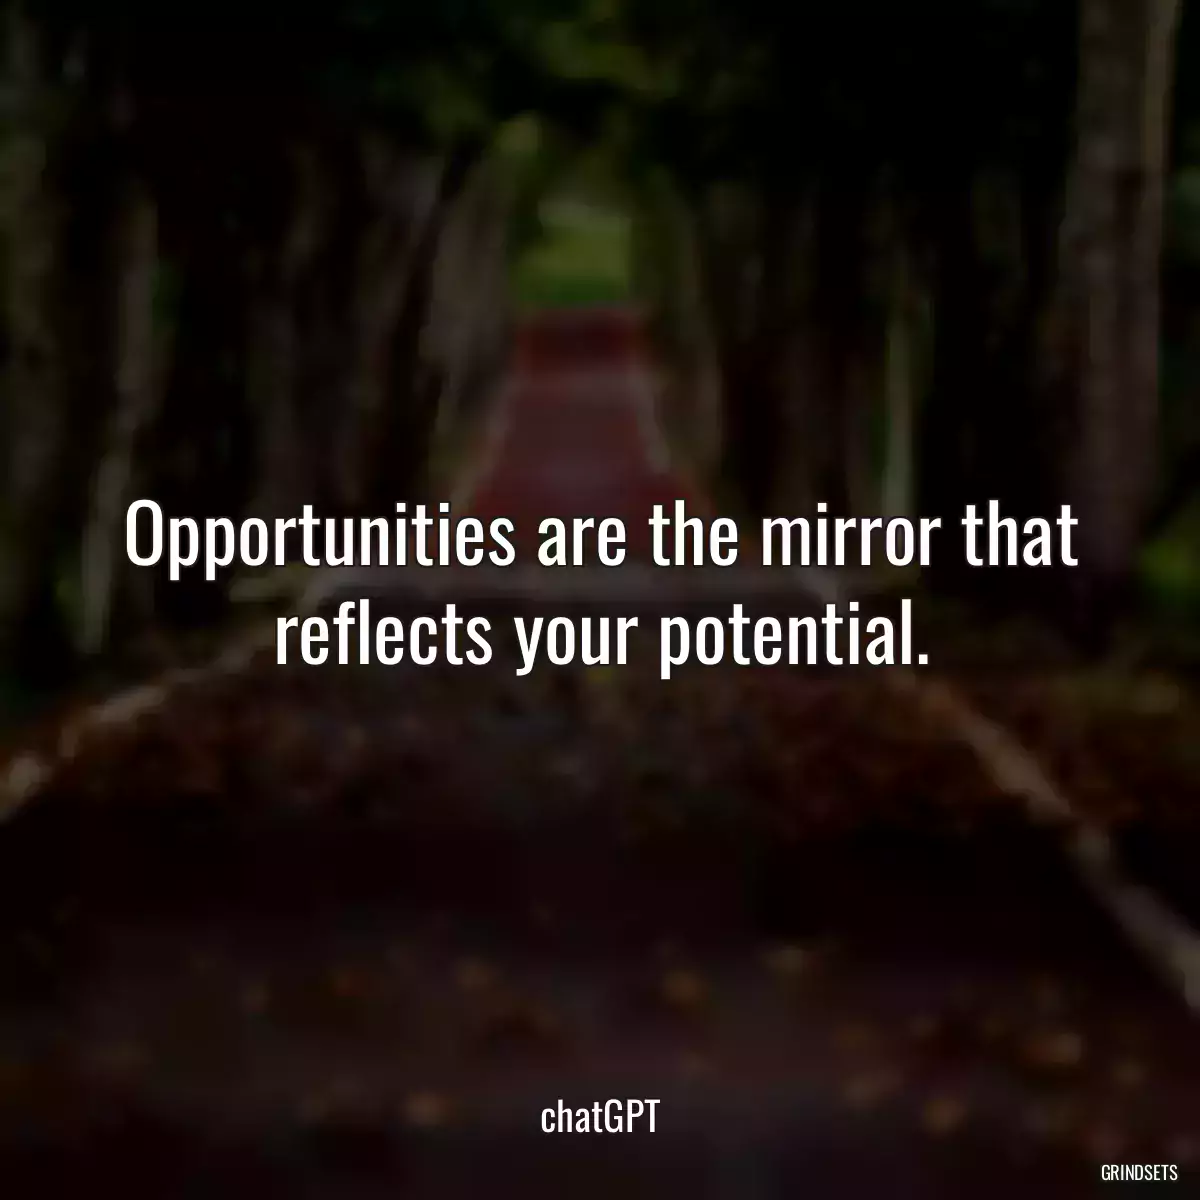 Opportunities are the mirror that reflects your potential.